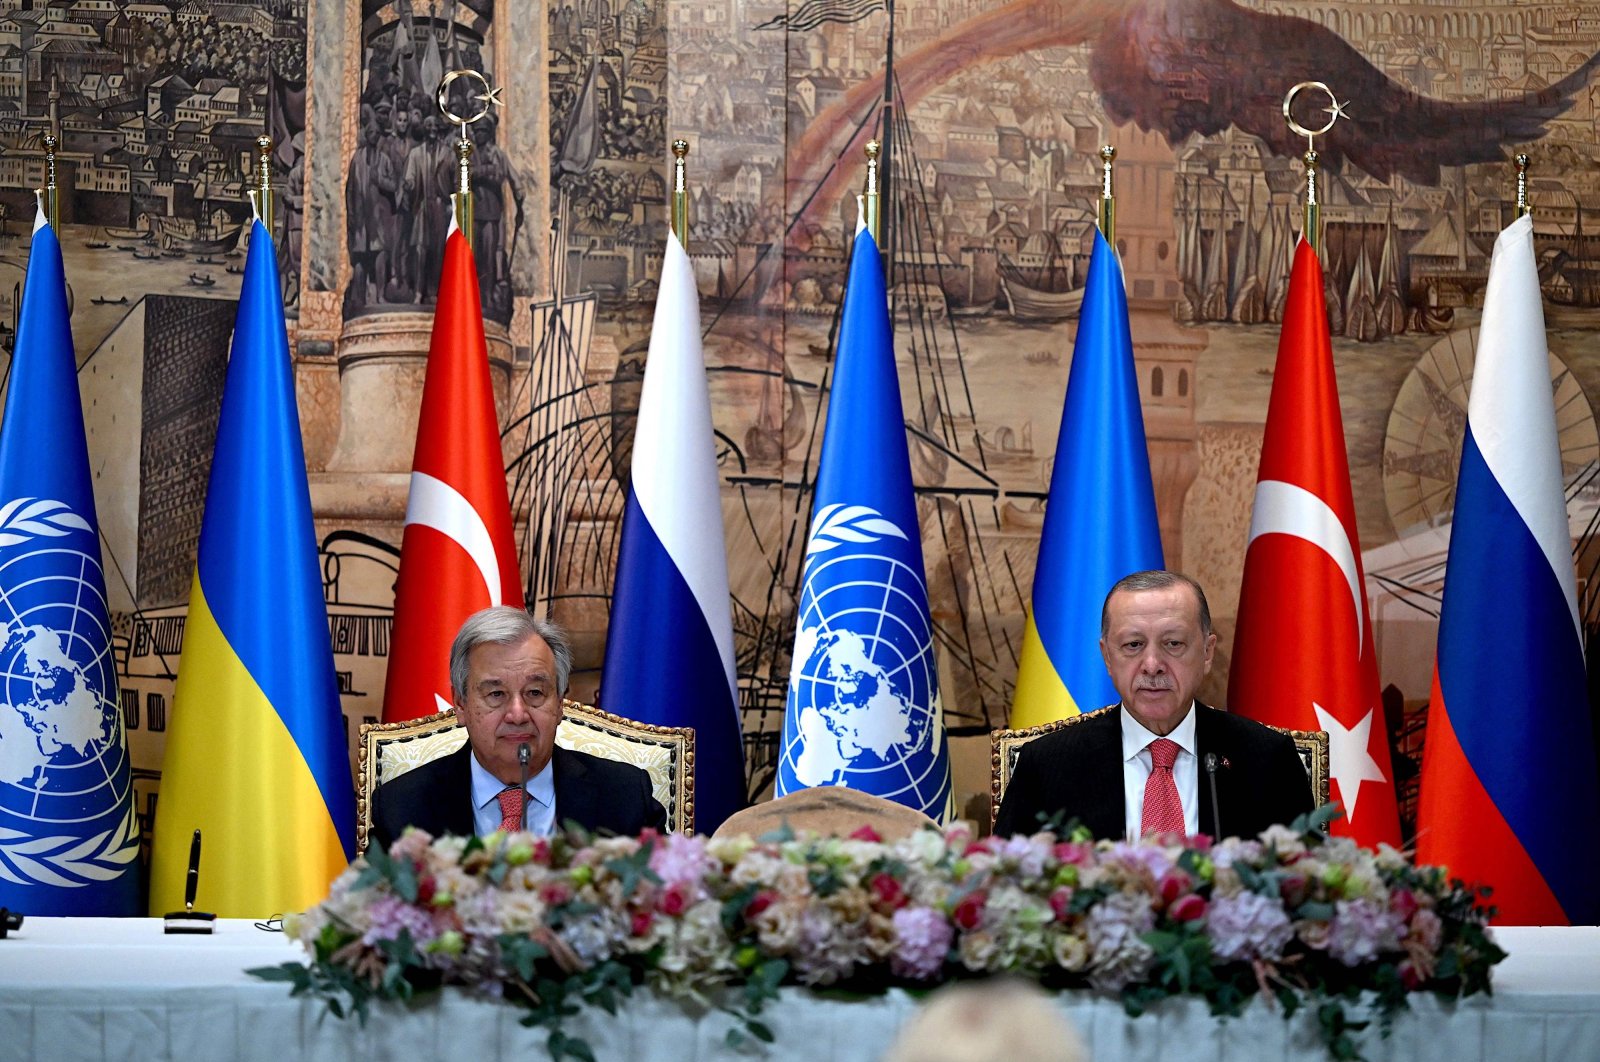 President Recep Tayyip Erdoğan (R) and U.N. Secretary-General Antonio Guterres sit at the start of the signature ceremony of an initiative on the safe transportation of grain and foodstuffs from Ukrainian ports, Istanbul, Turkey, July 22, 2022. (AFP Photo)